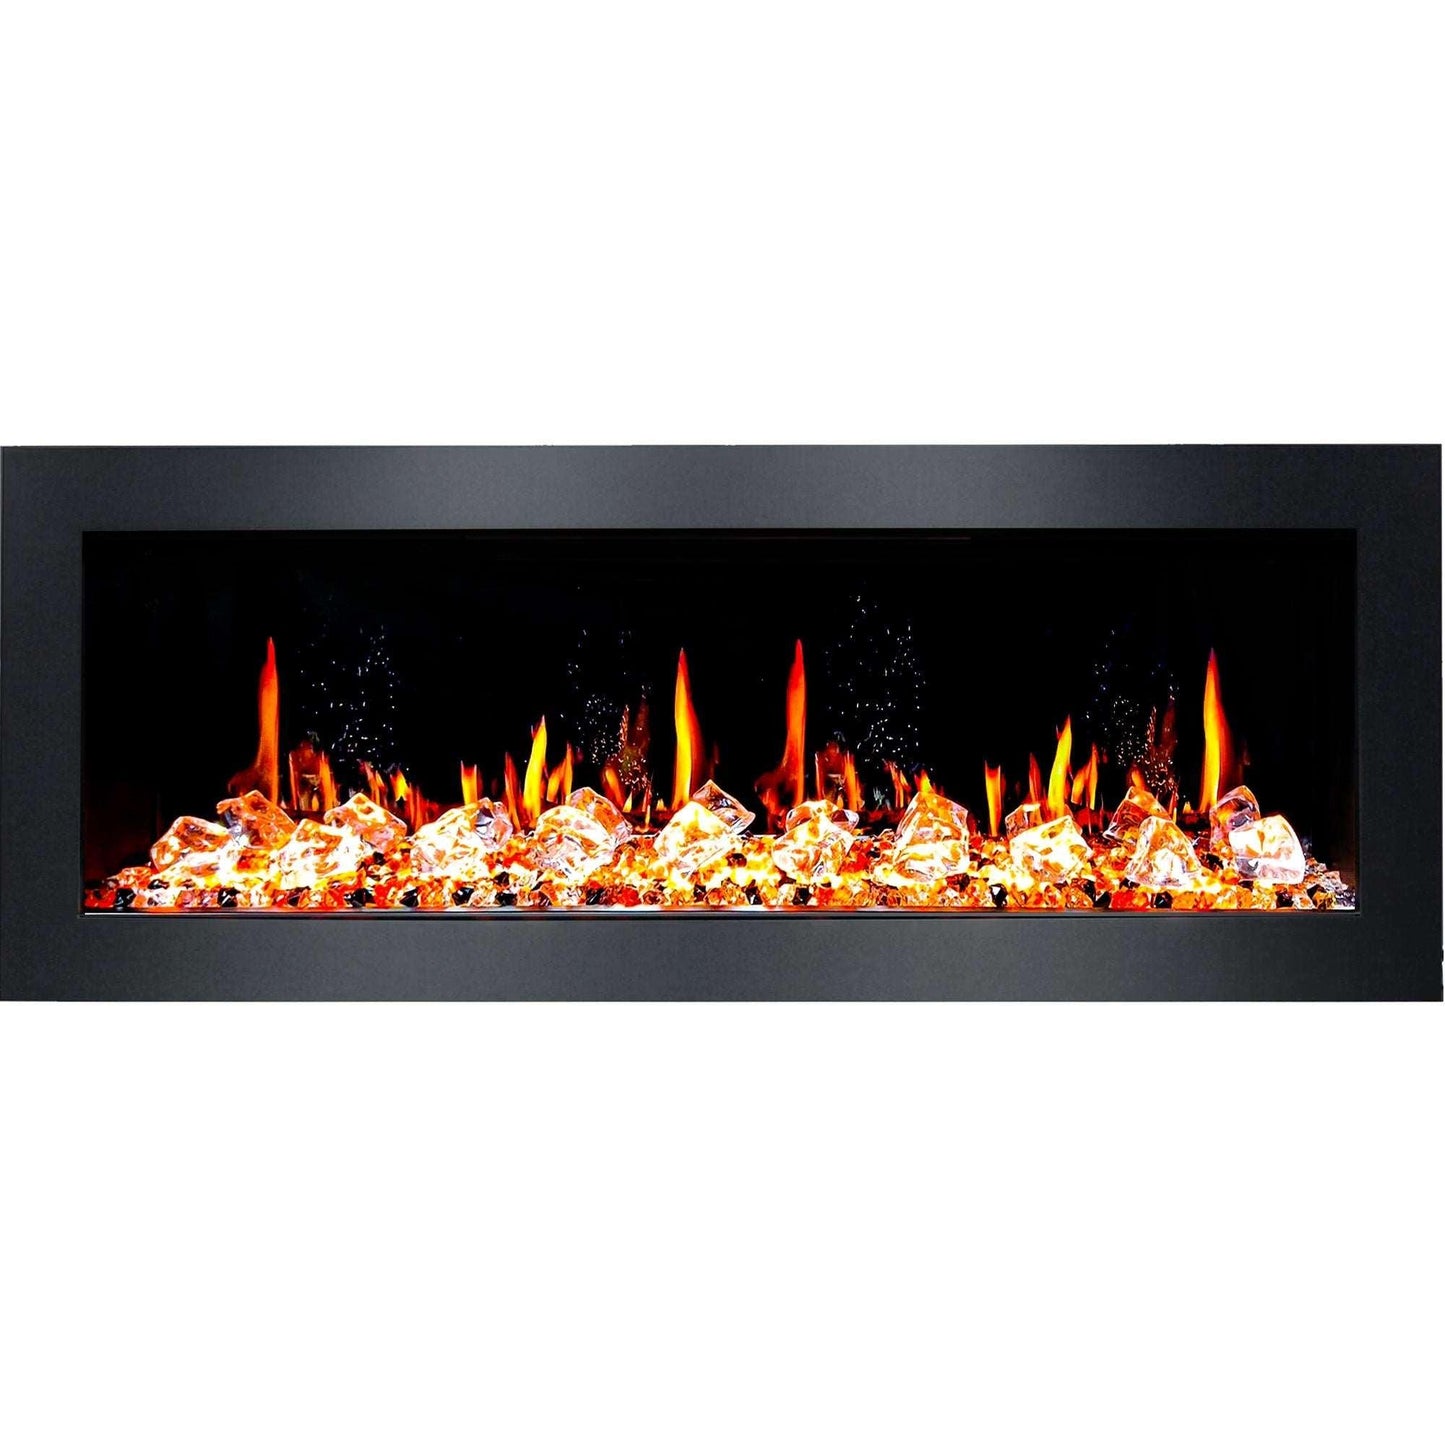 ZopaFlame™ 58" Linear Wall-mount Electric Fireplace - BC19588V - ZopaFlame Fireplaces